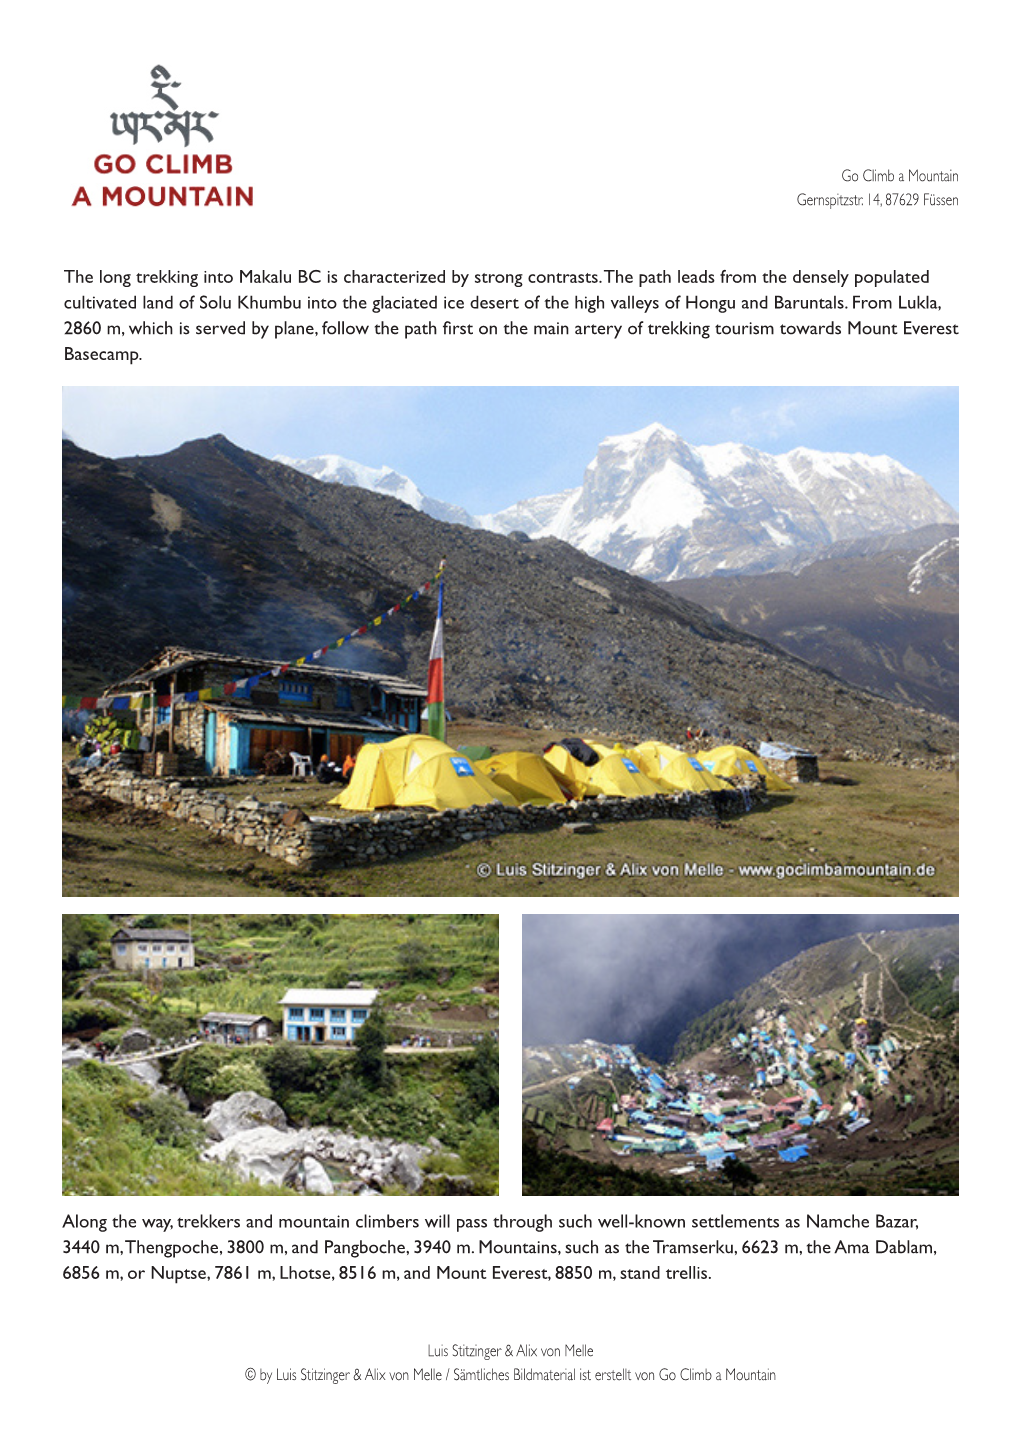 The Long Trekking Into Makalu BC Is Characterized by Strong Contrasts